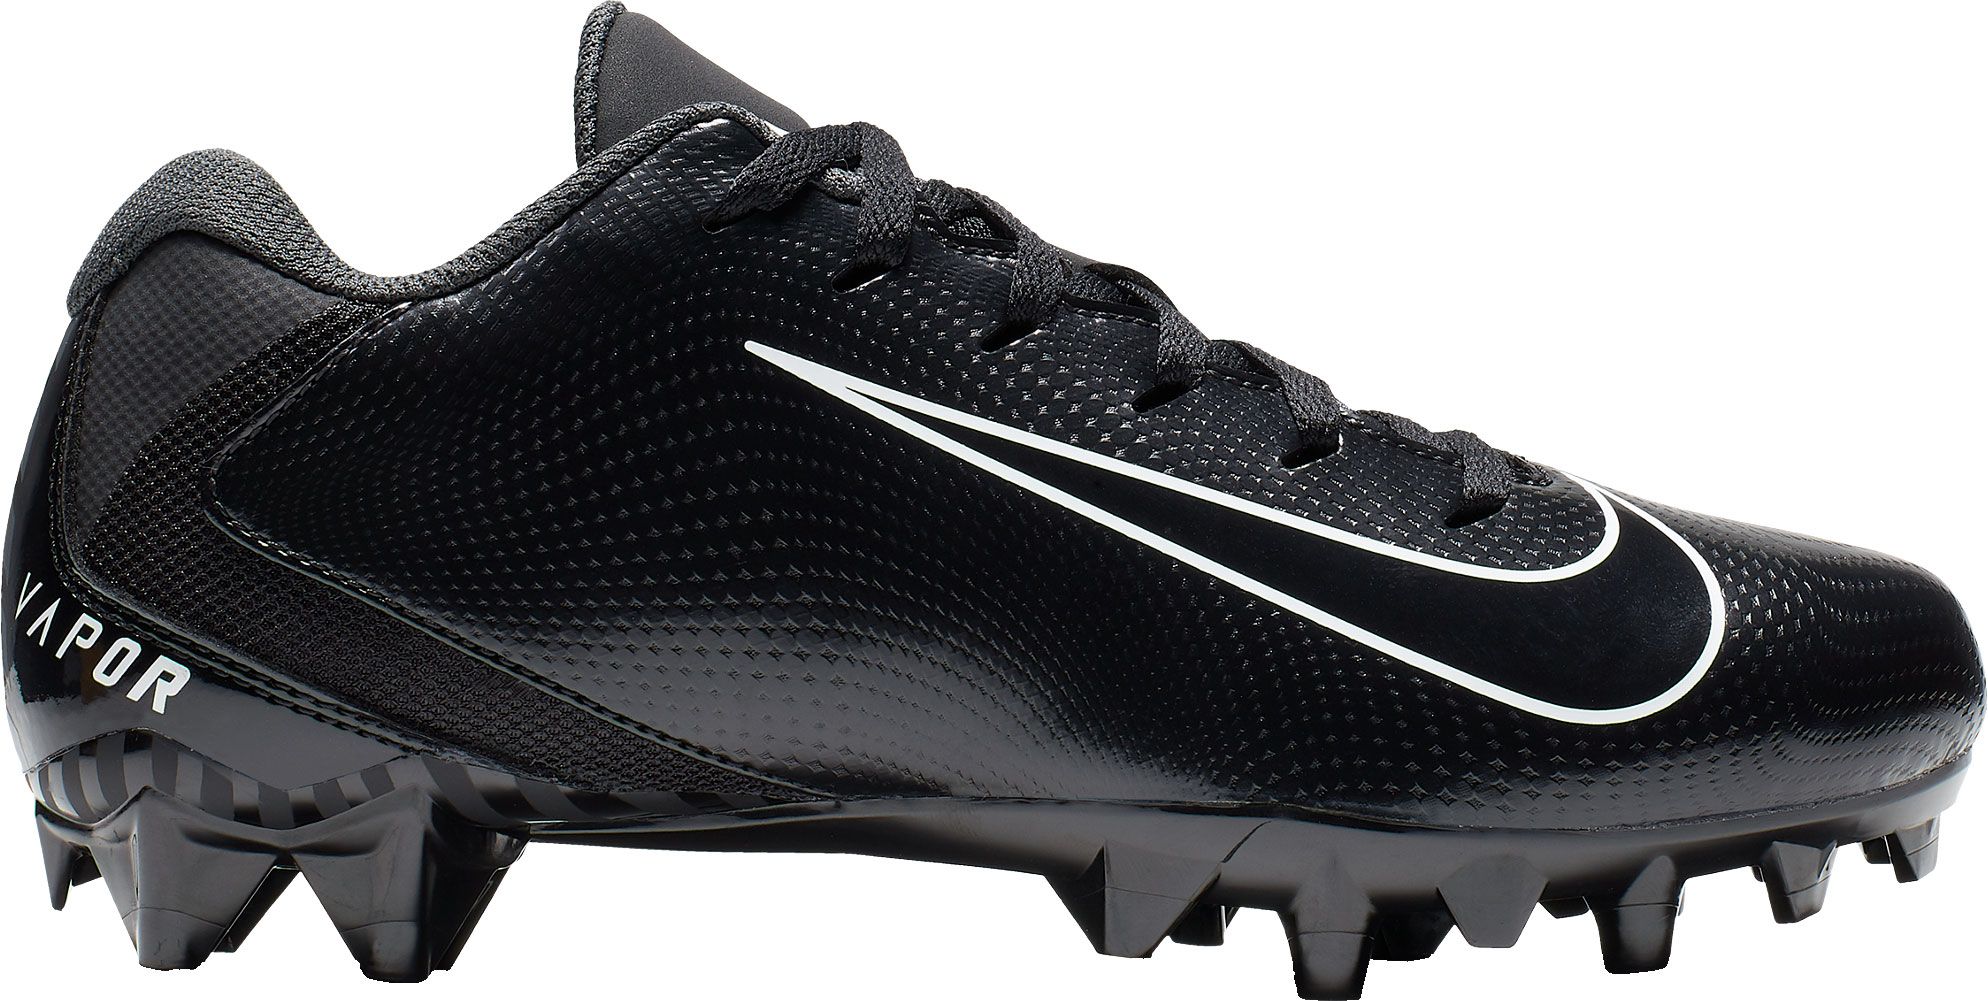 size 13c football cleats